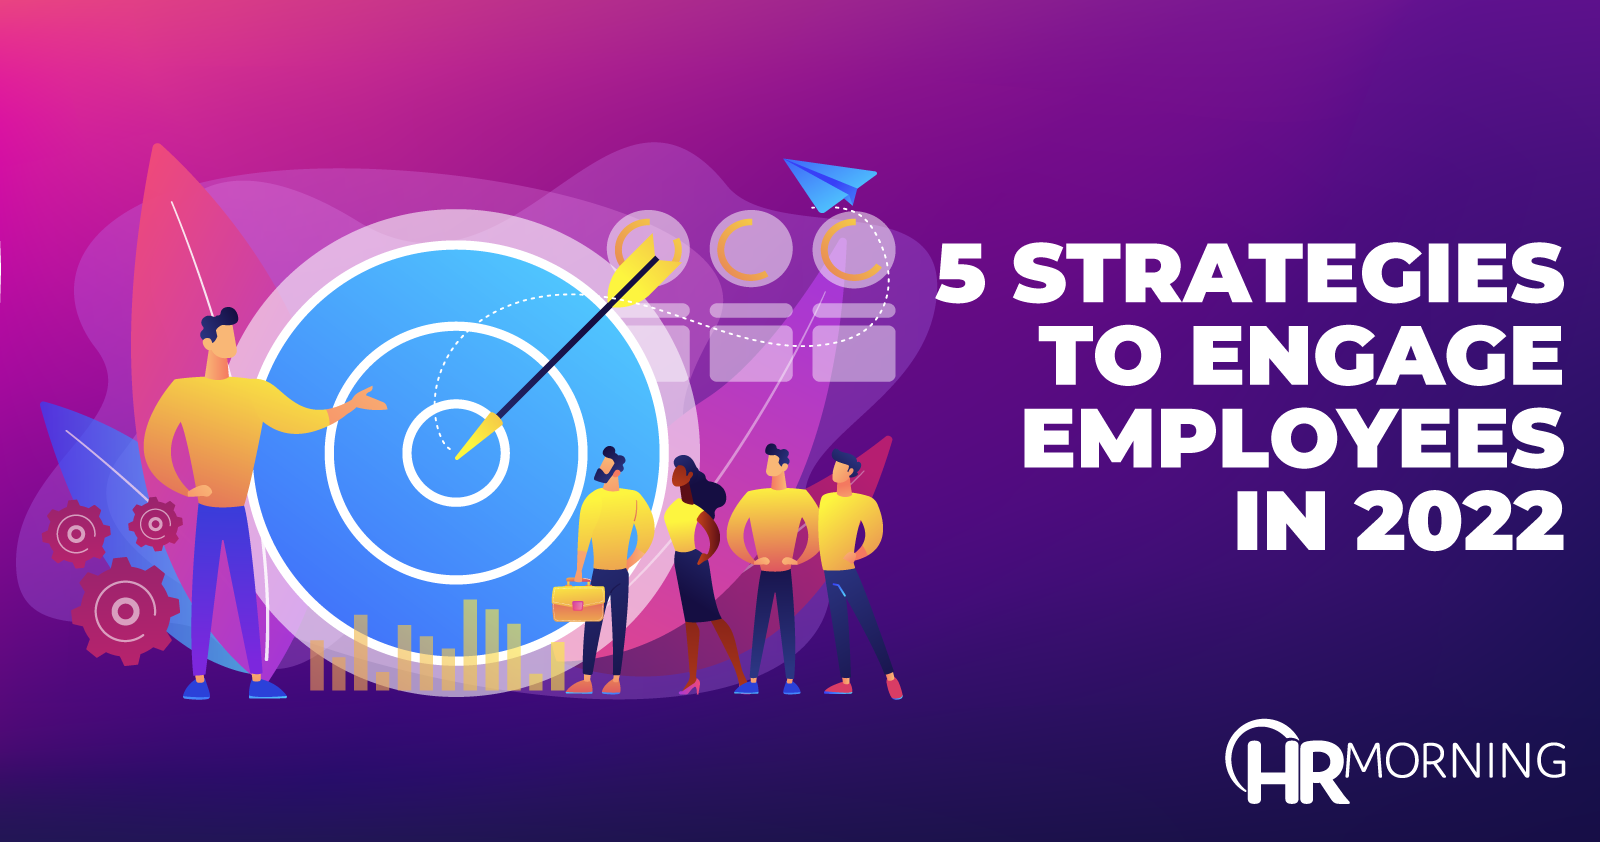 5 Strategies To Engage Employees In 2022